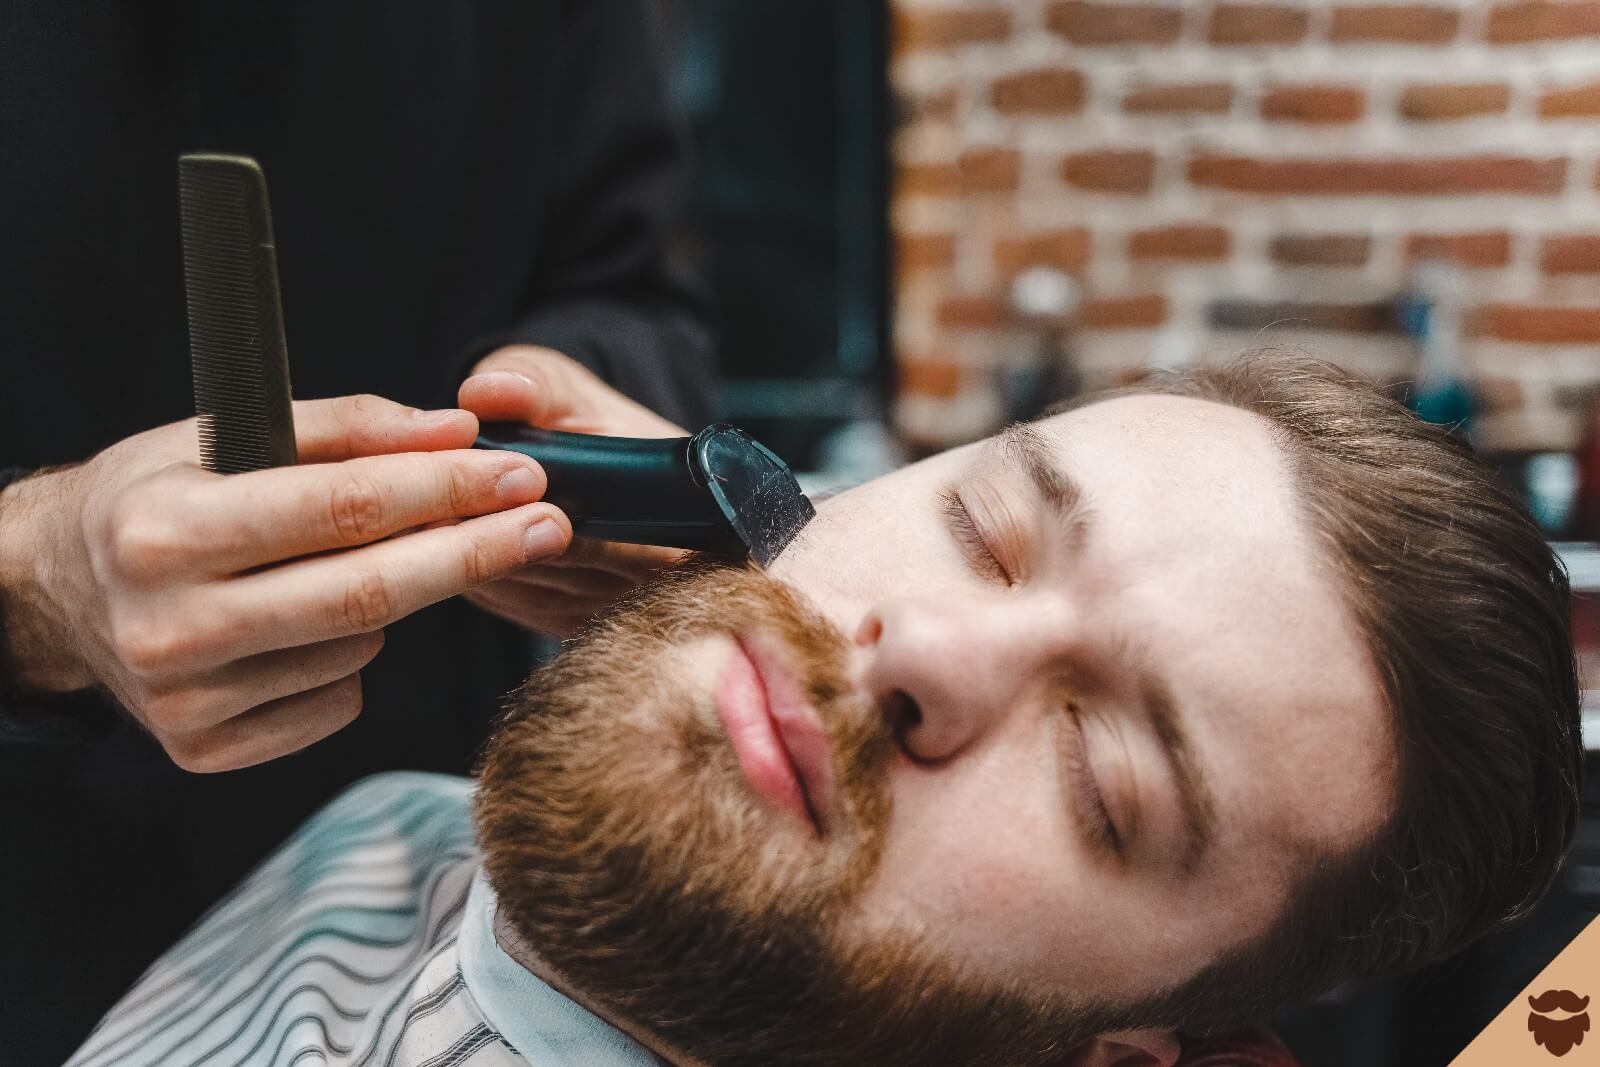 Man gets his beard trimmed with clippers